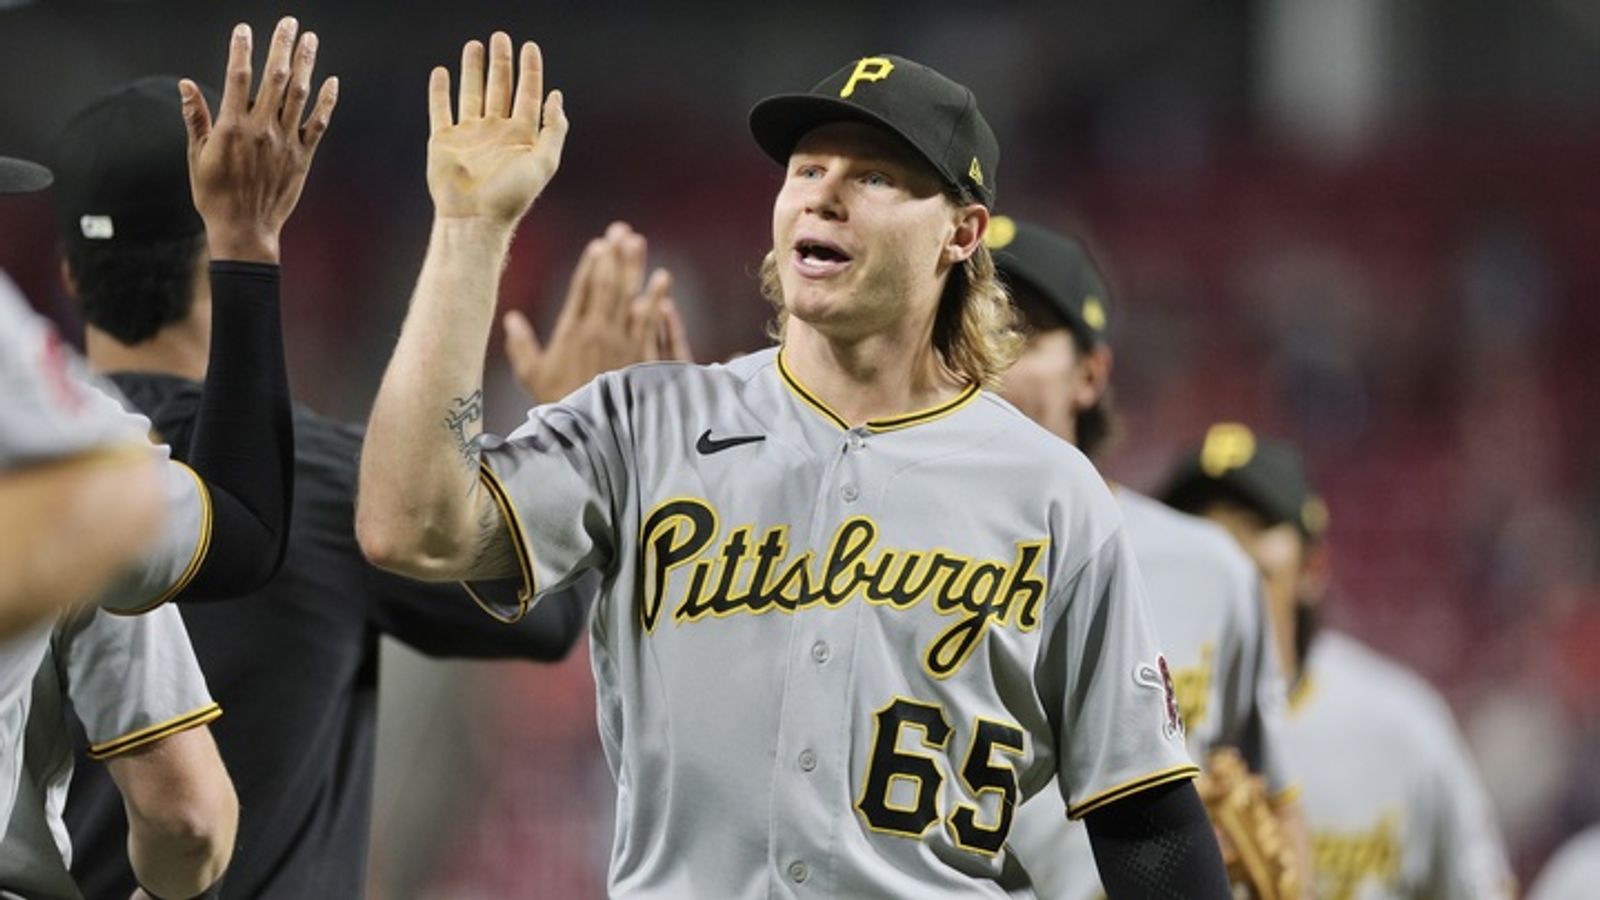 Proud of this one:' Pirates pull off largest comeback in franchise